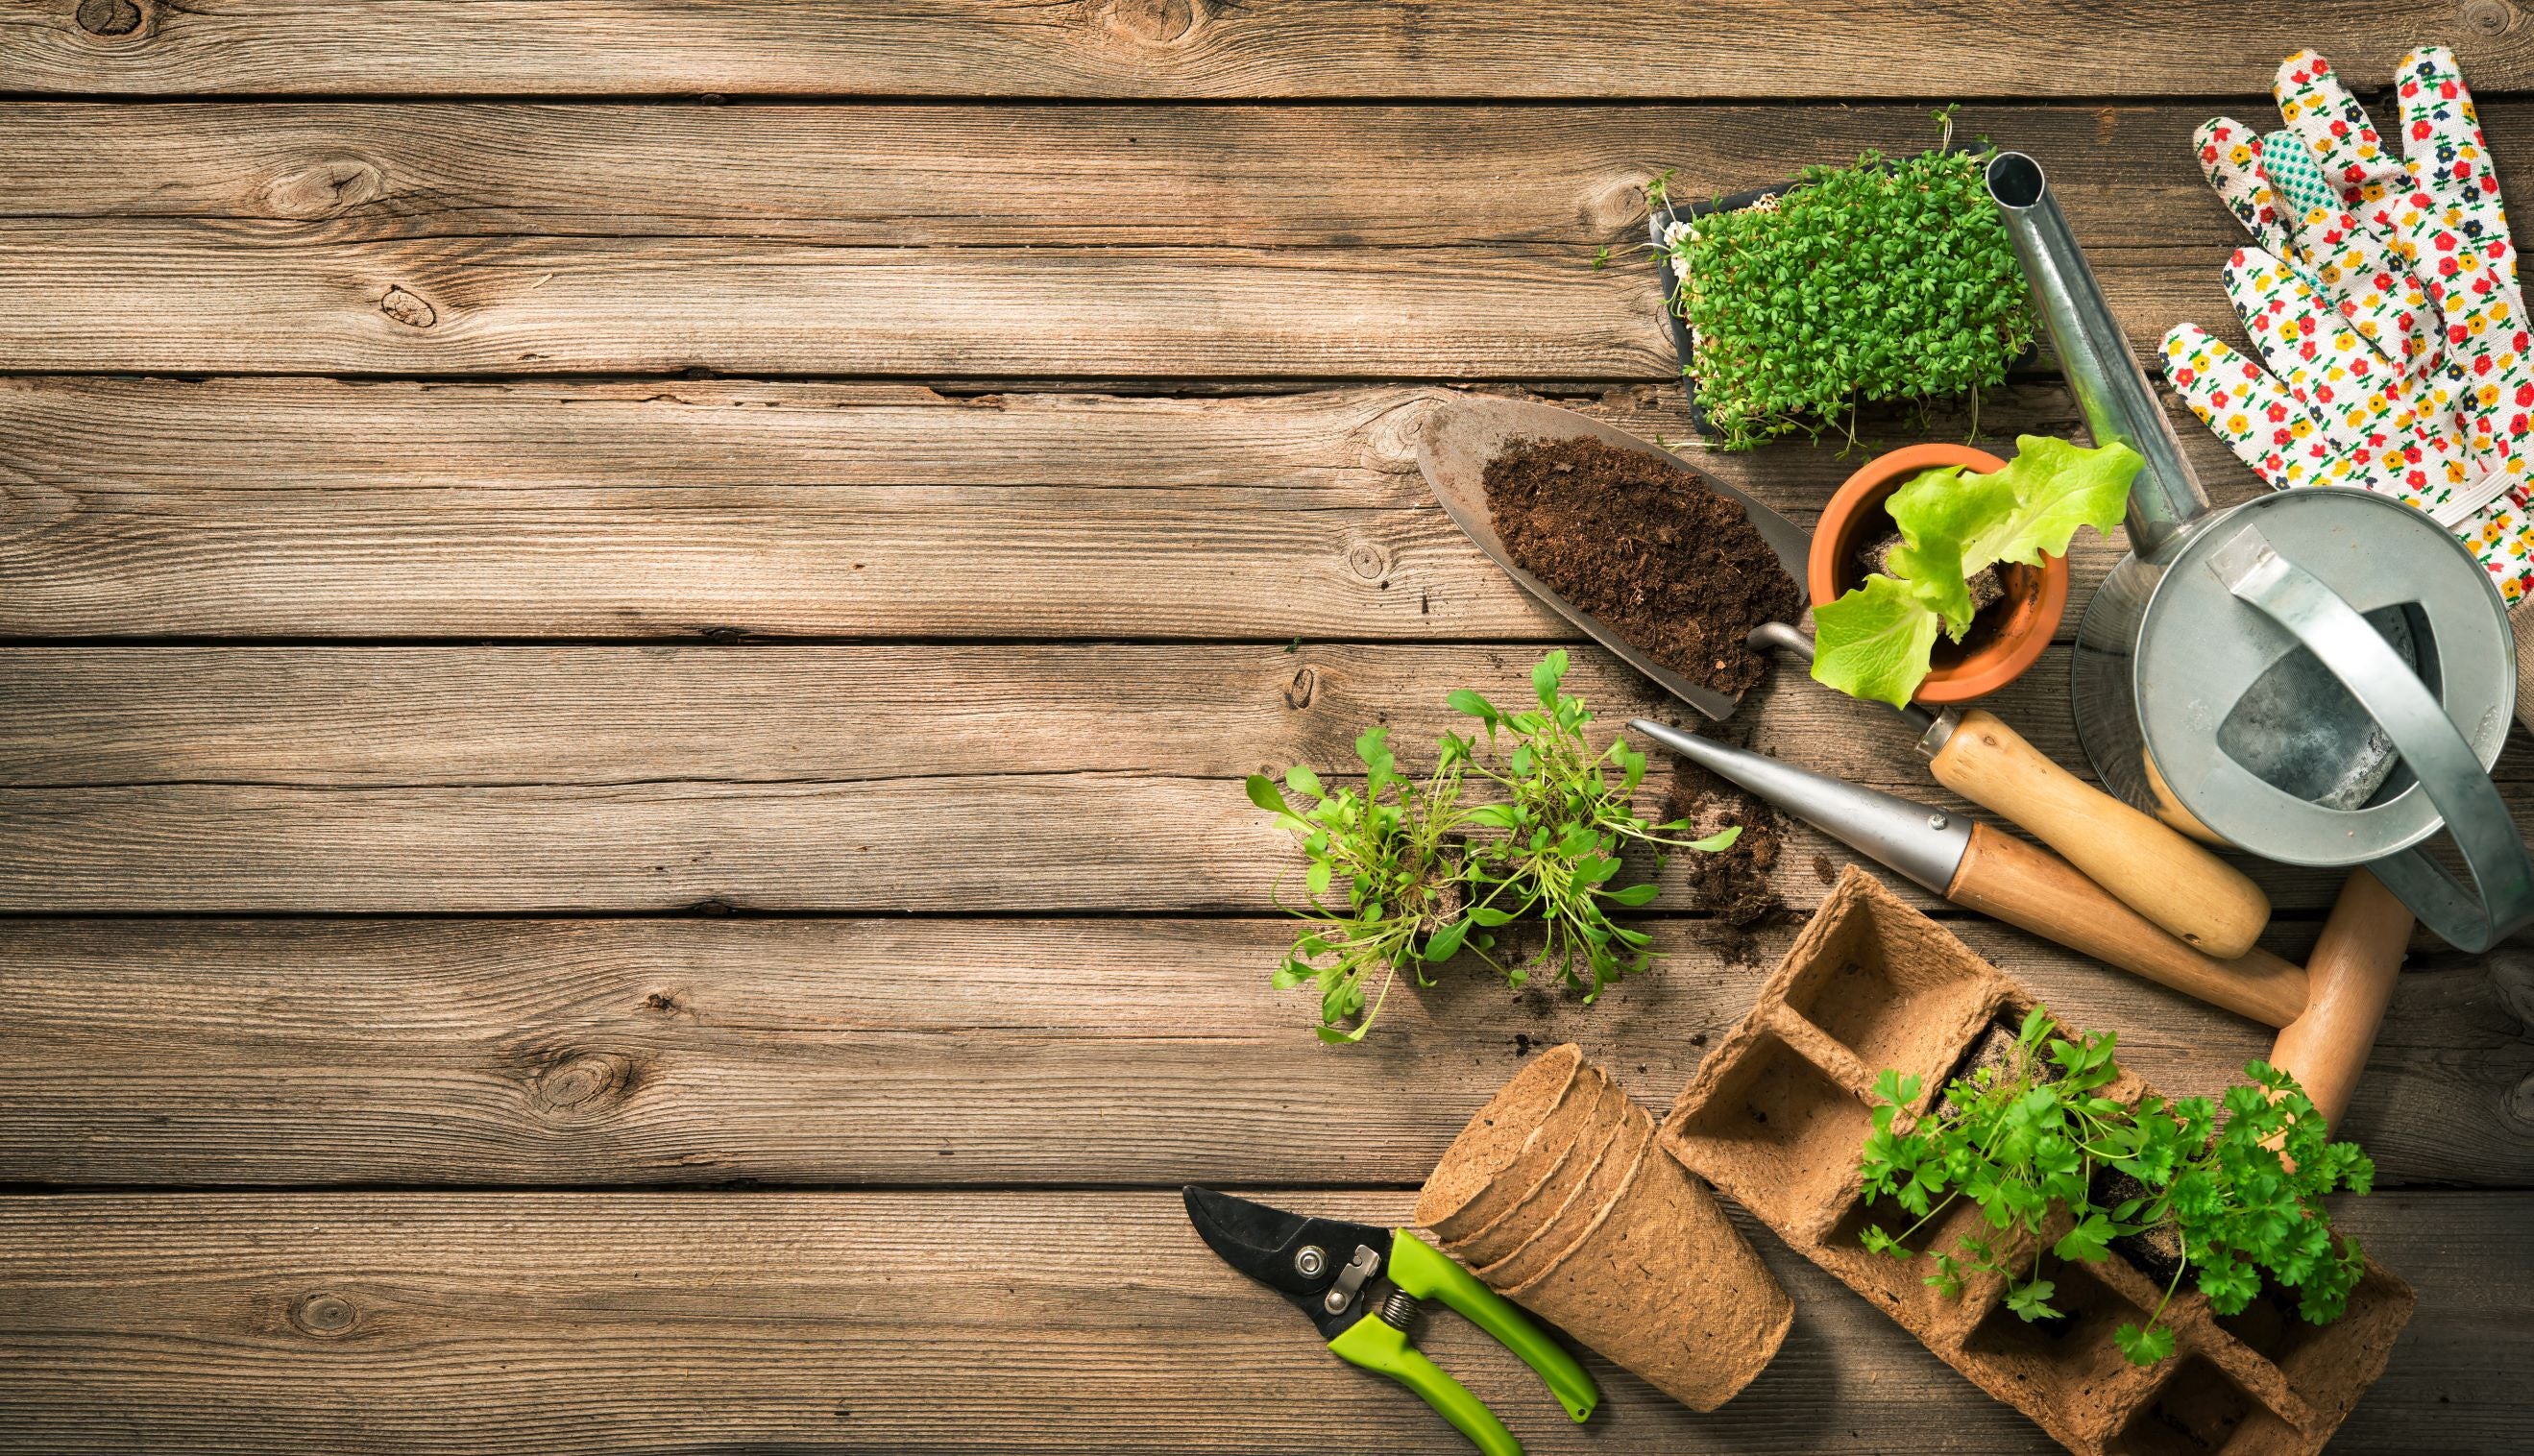 Wooden plank background with gardening supplies and plants.